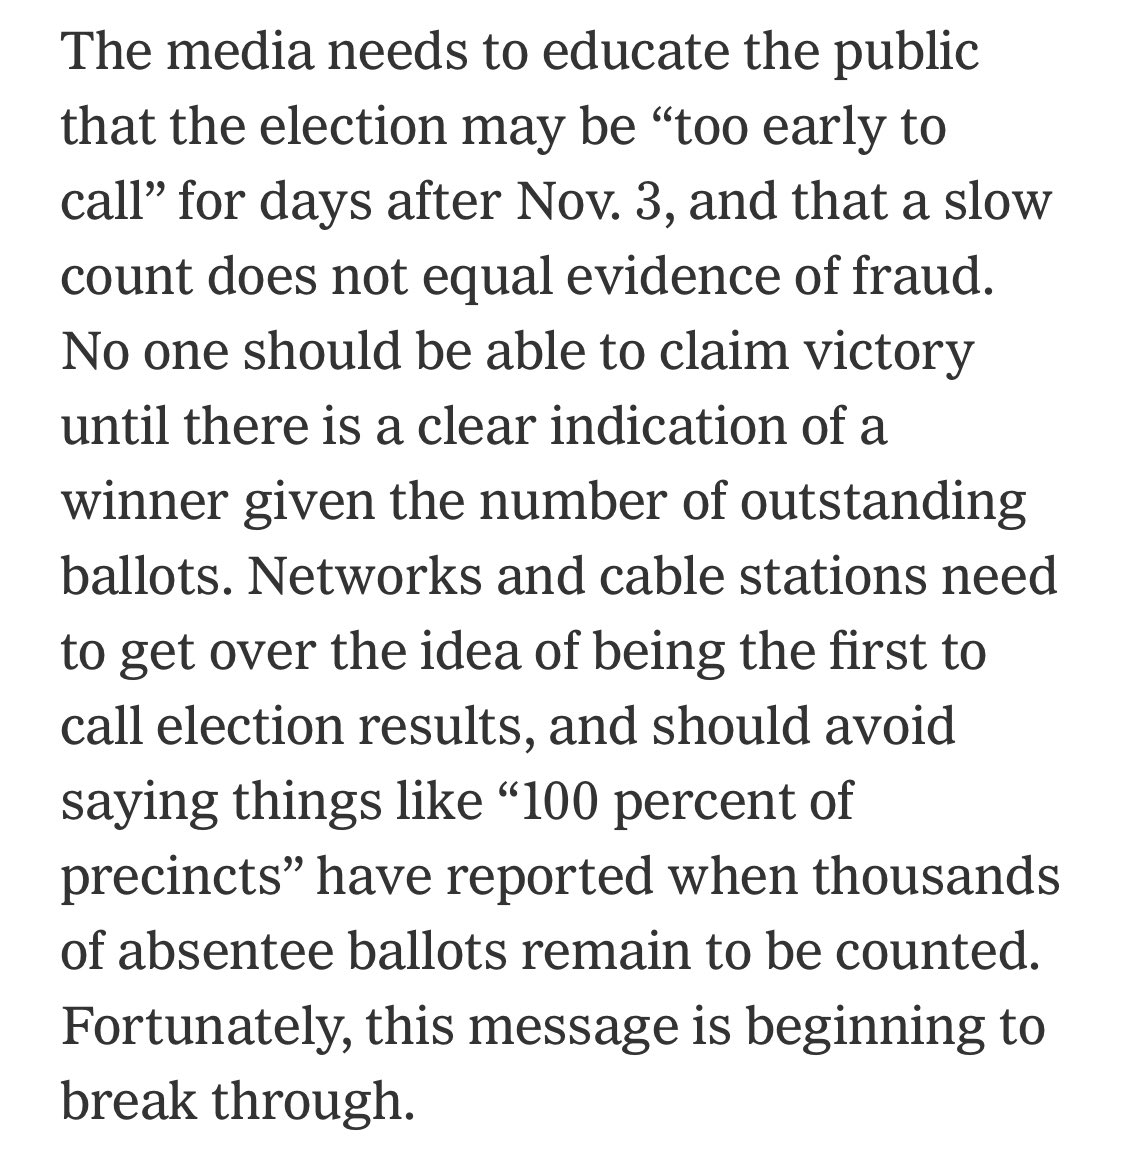 Interrupting our regularly scheduled Presidential Election Delegitimization Programming to bring you this public service announcement from  @rickhasen  https://www.nytimes.com/2020/08/19/opinion/trump-usps-mail-voting.html